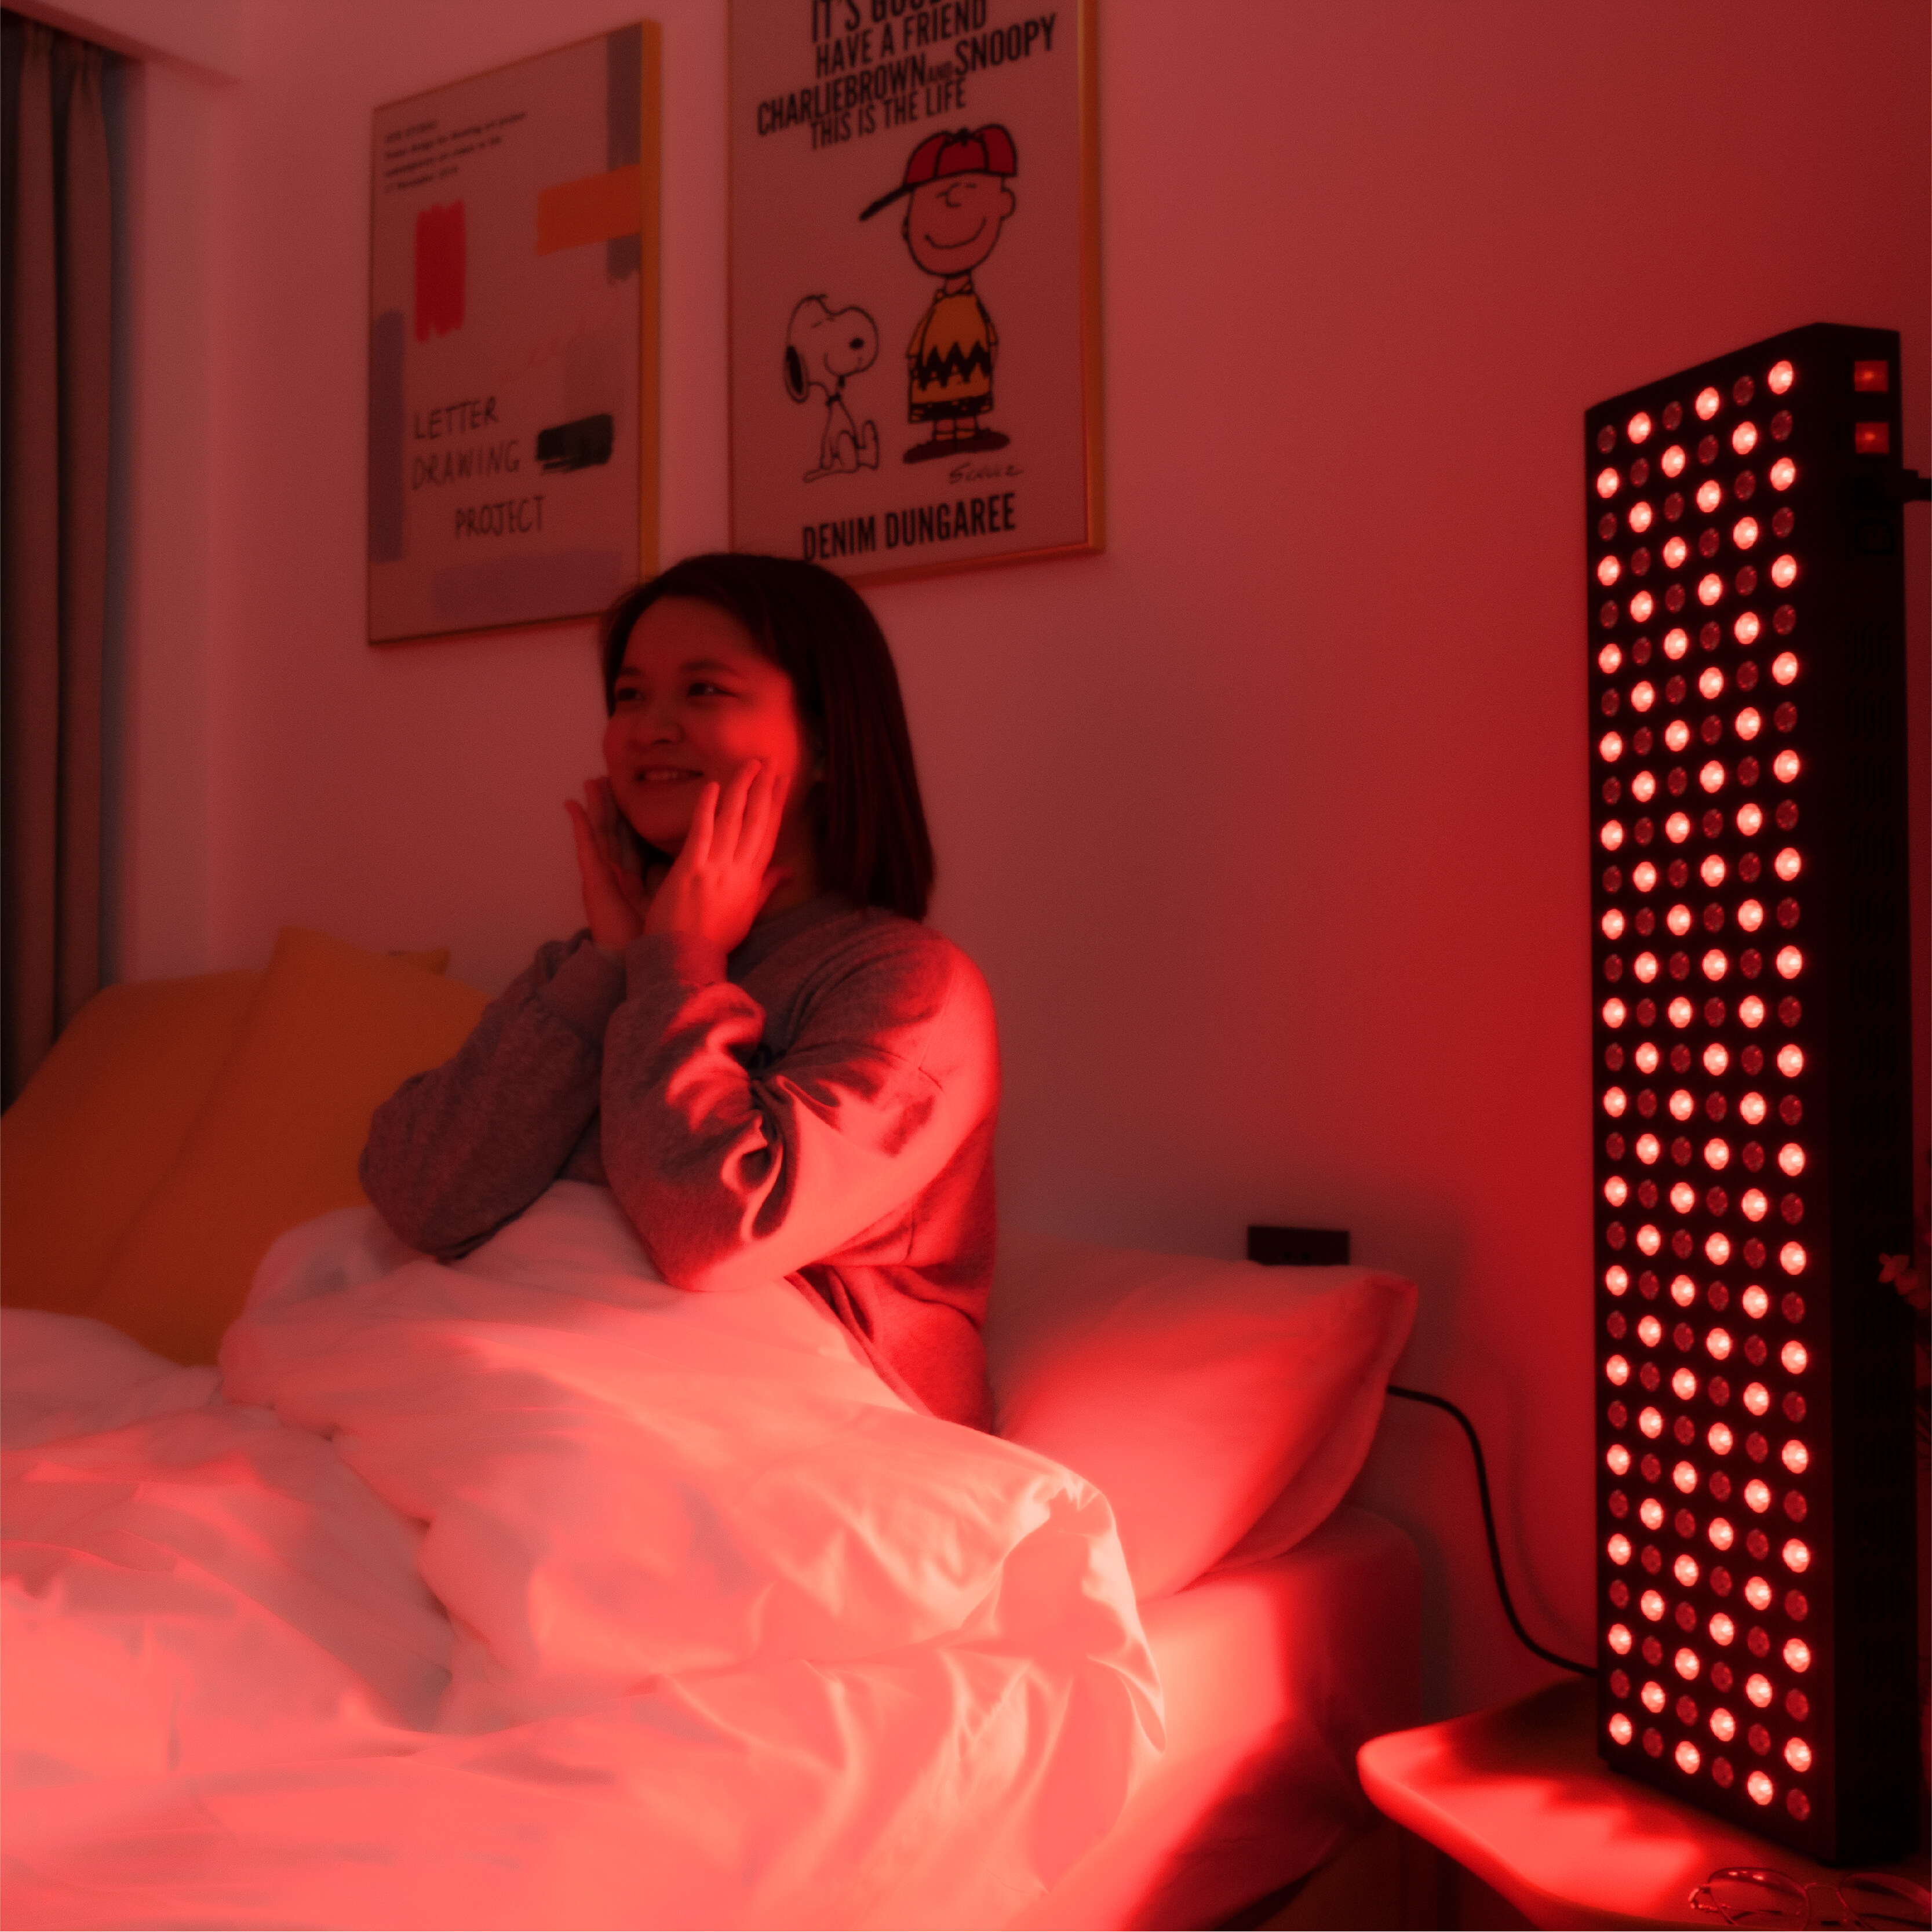 fda approved red light therapy devices for face, fda-approved red light therapy devices for face, best red light therapy device for face, best red light therapy devices for face